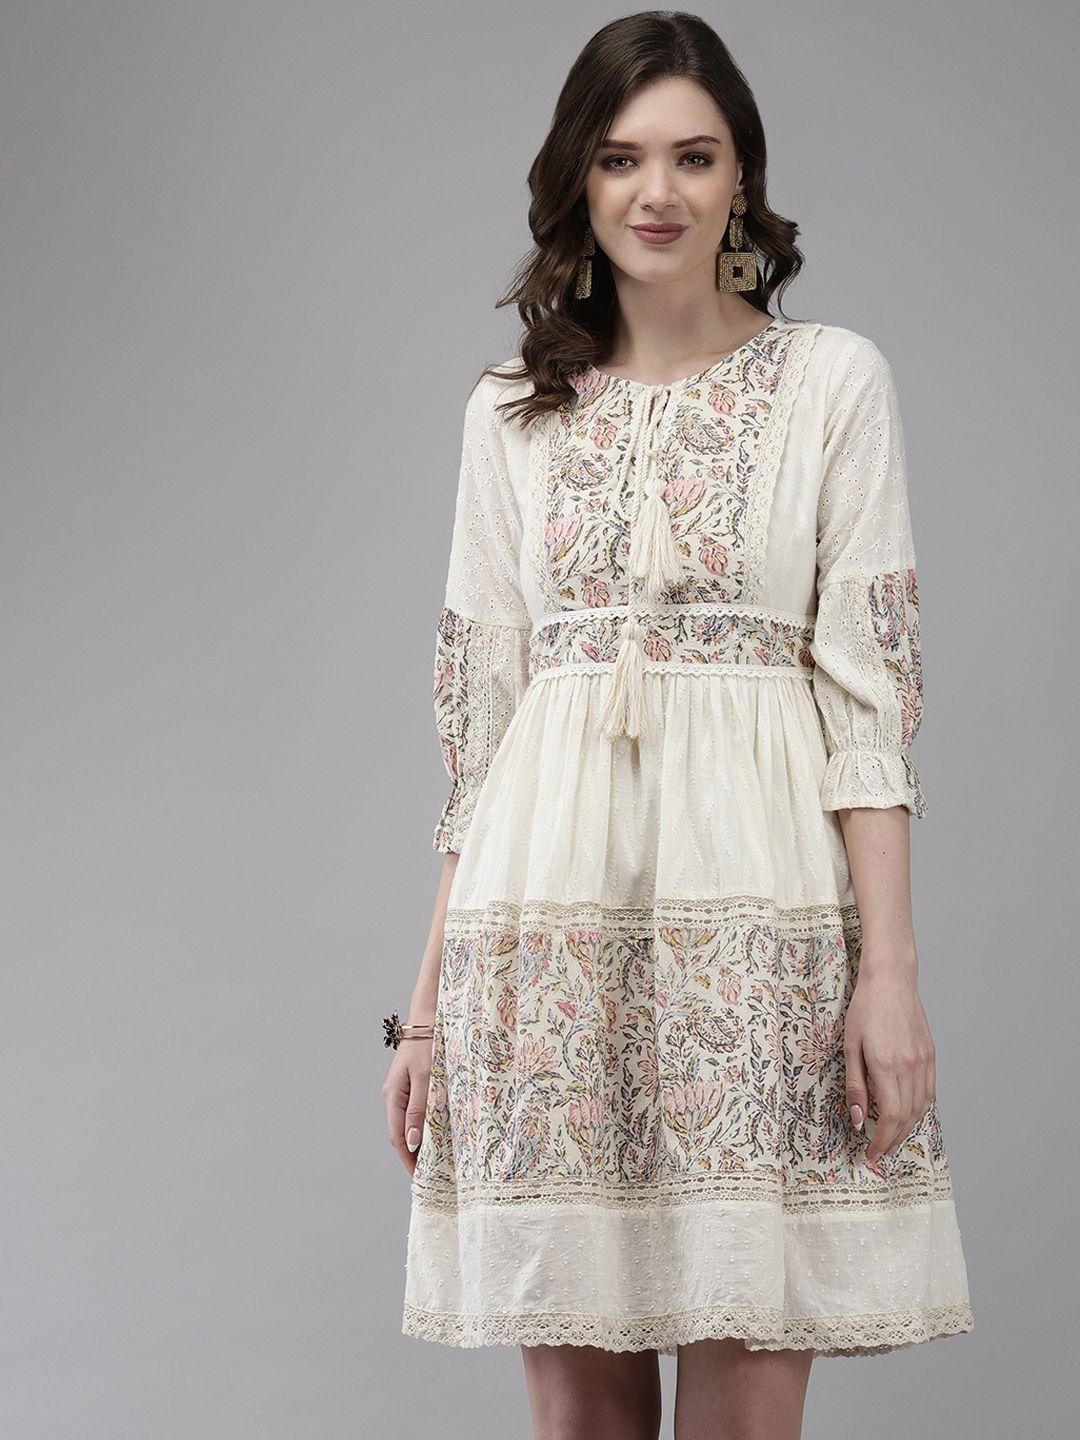 ishin off white floral embroidered tie-up neck a-line dress